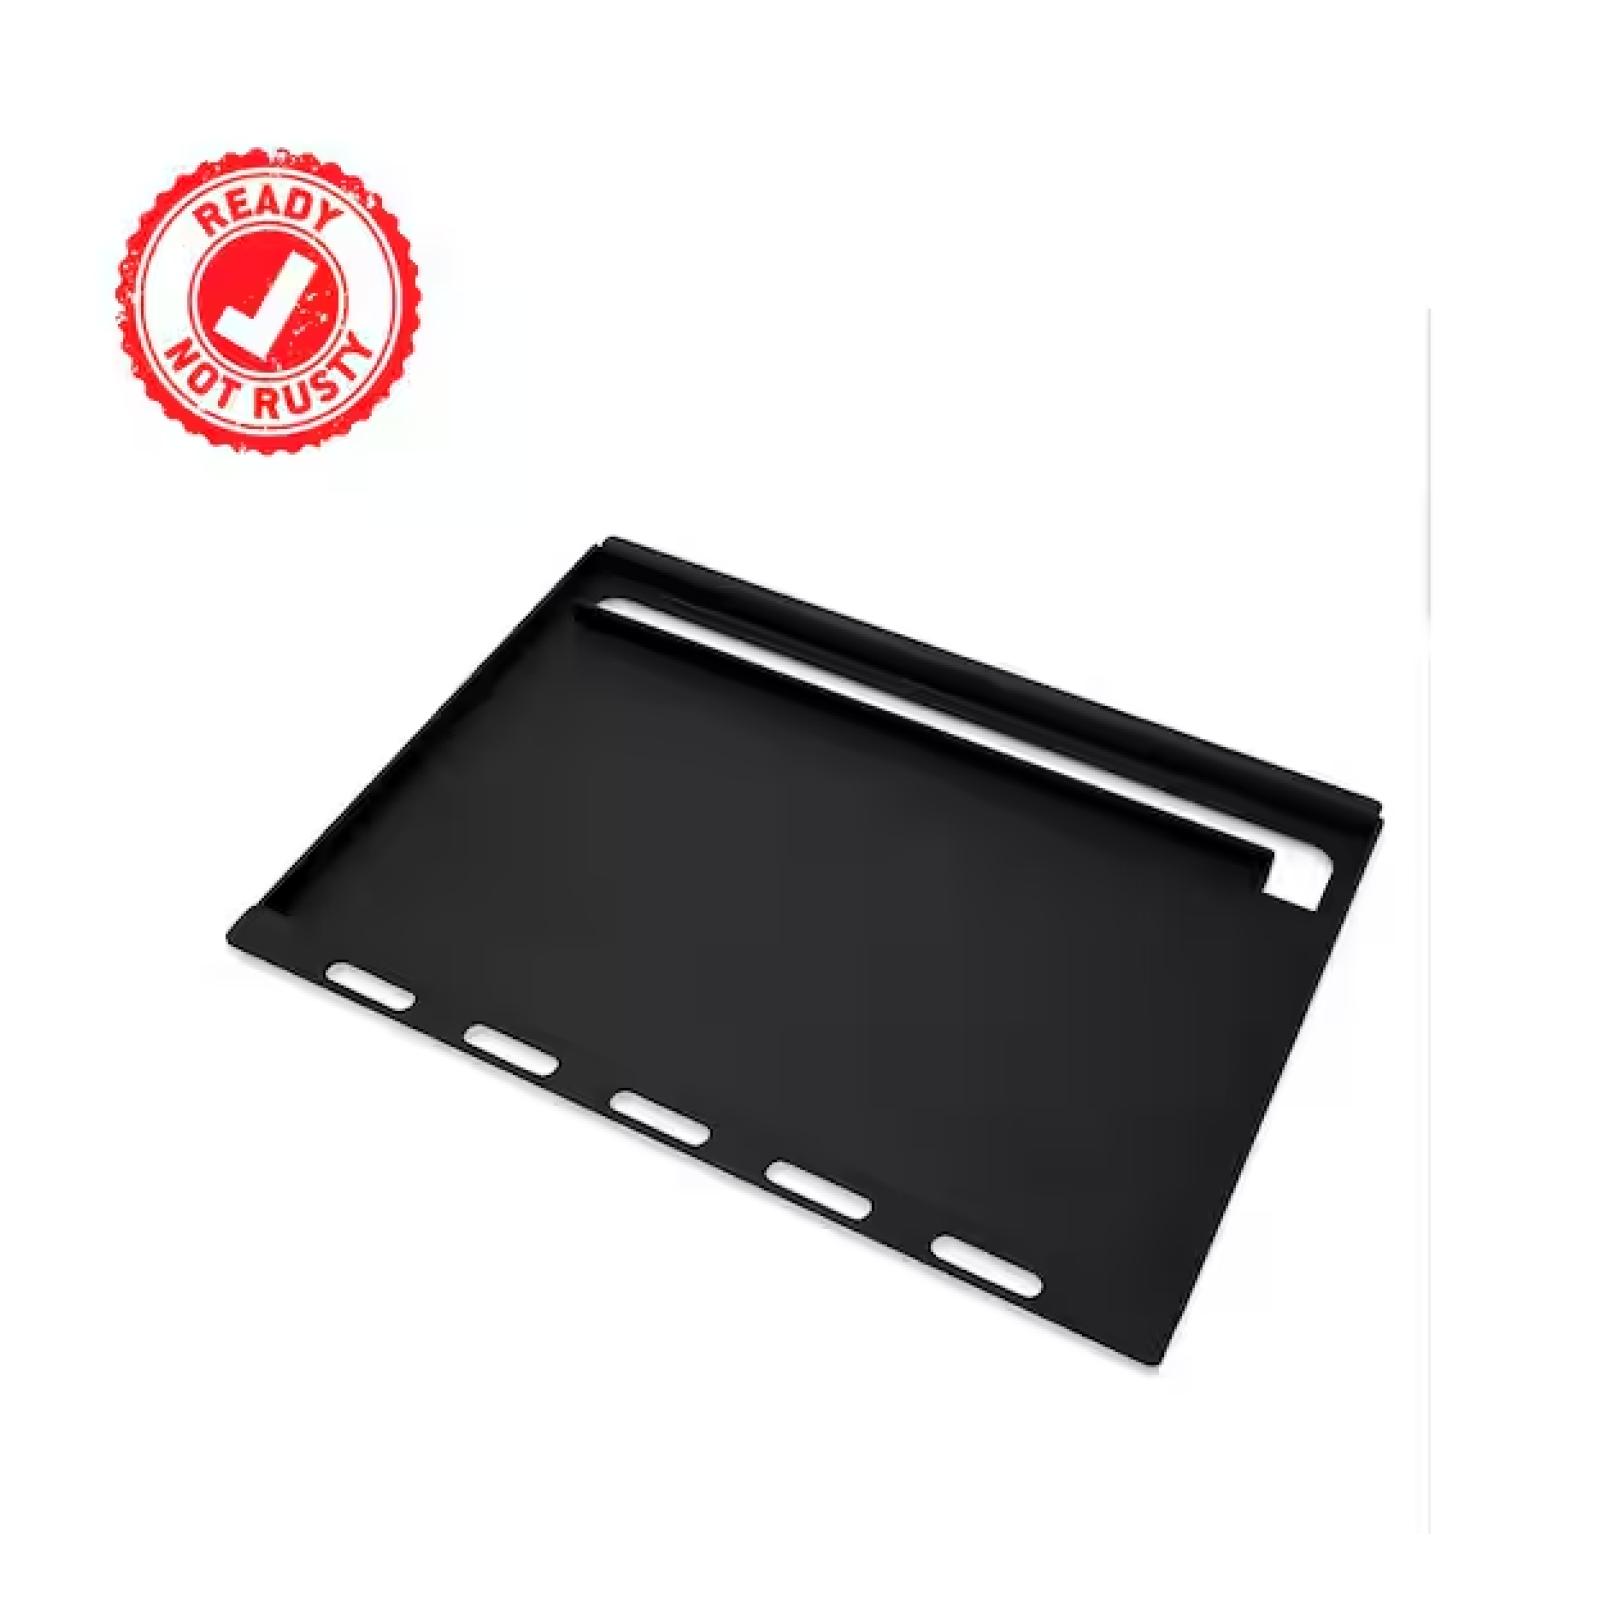 NEW!  - Weber Genesis Grill 300 Series Rust-Resistant Griddle Insert